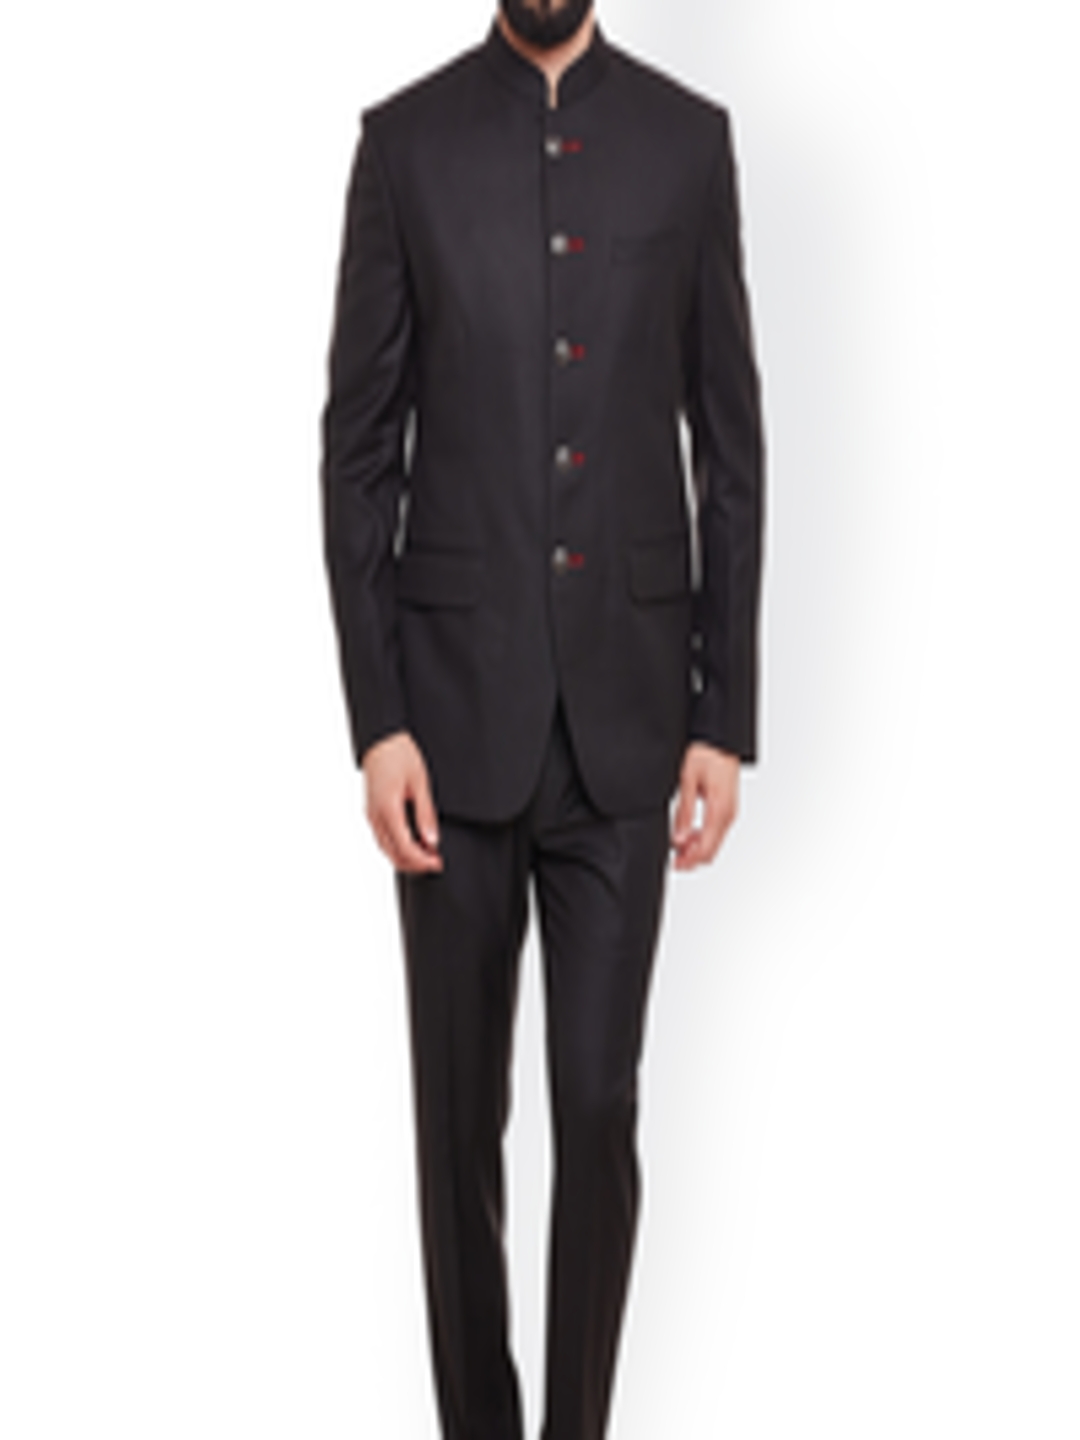 Buy Alvin Kelly Black Single Breasted Formal Suit - Suits for Men ...